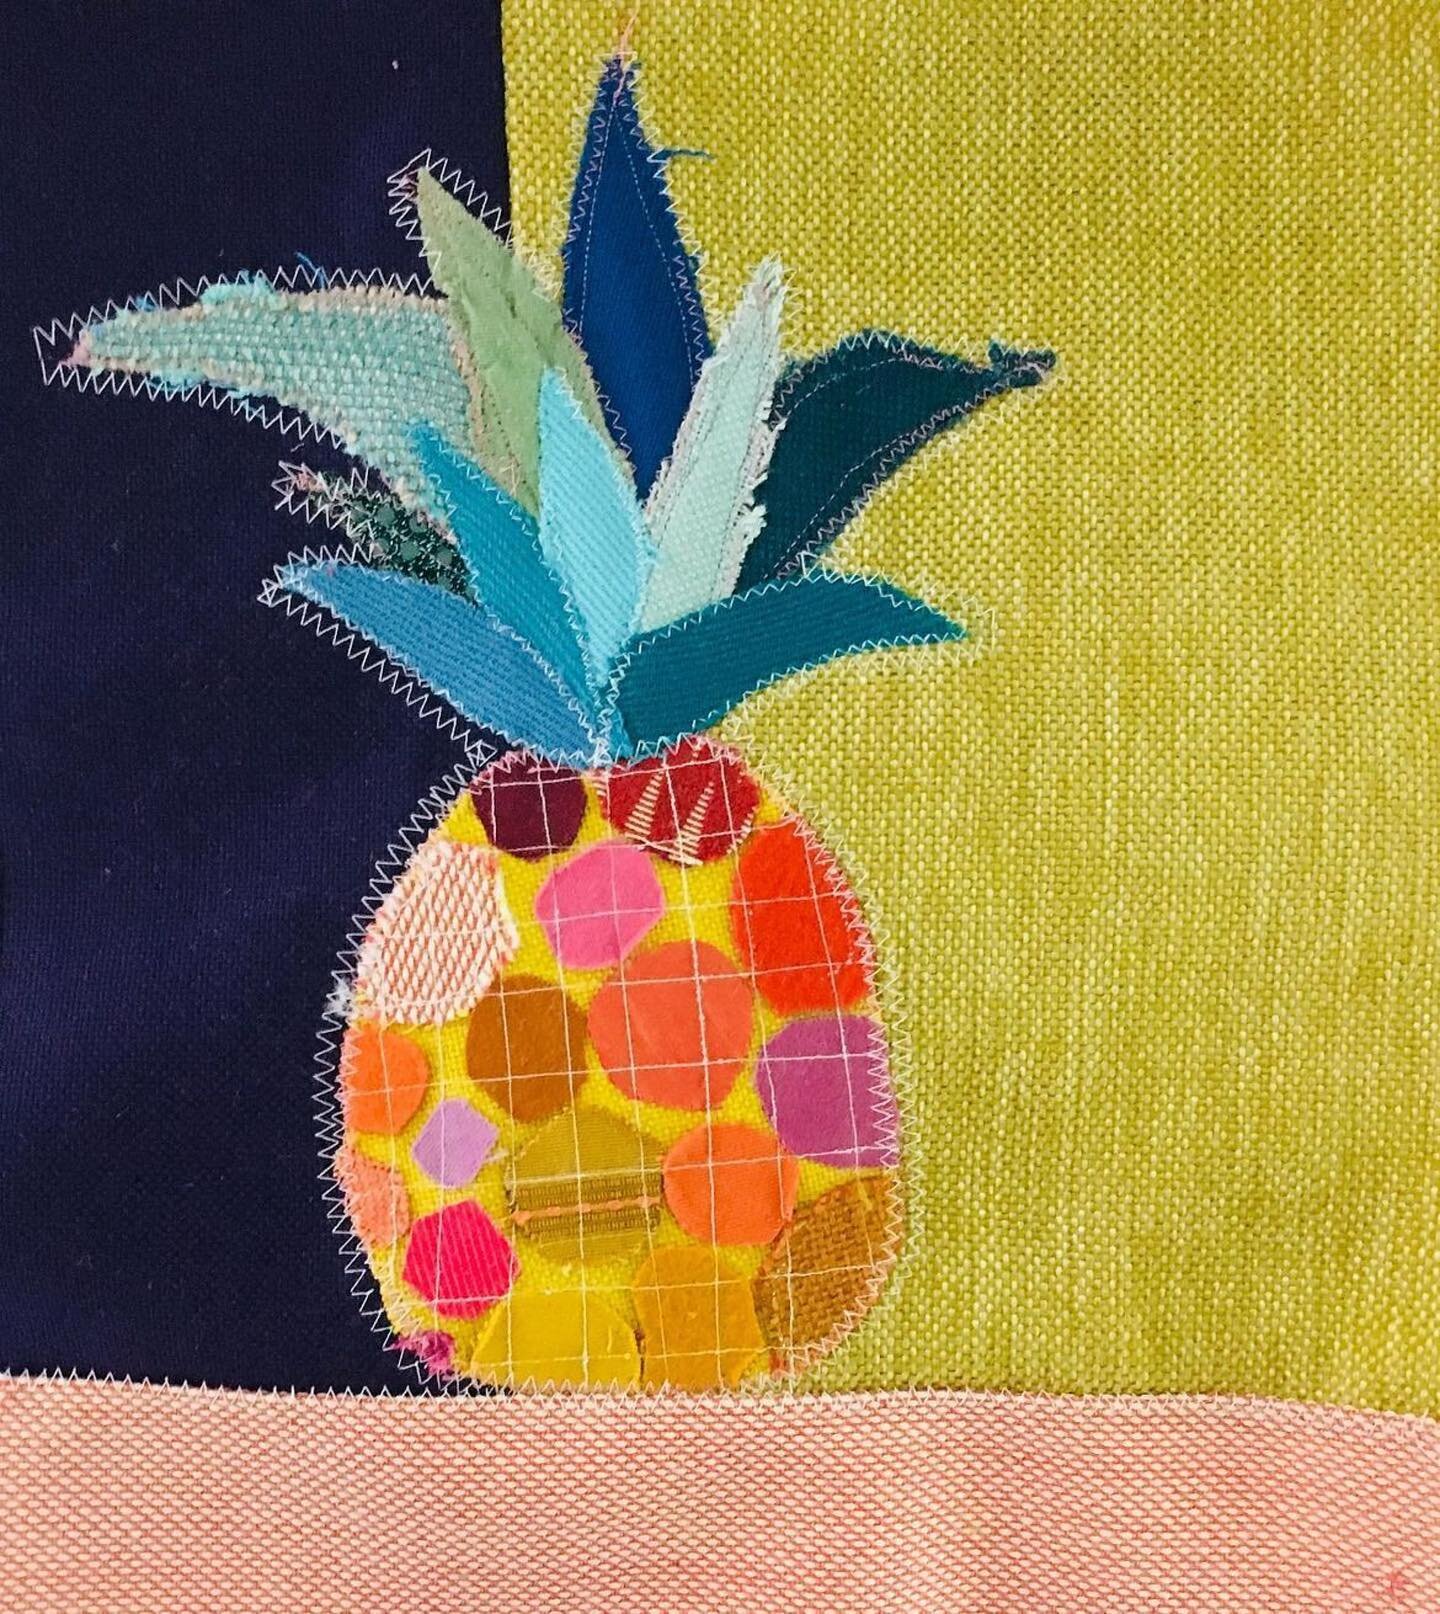 This great piece made by @alipageoleary made me wonder: why pineapple?

I learned pineapple is a symbol of welcome and hospitality. Like many things in American history, it&rsquo;s complicated and layered. 

A tidbit from my google dive revealed that